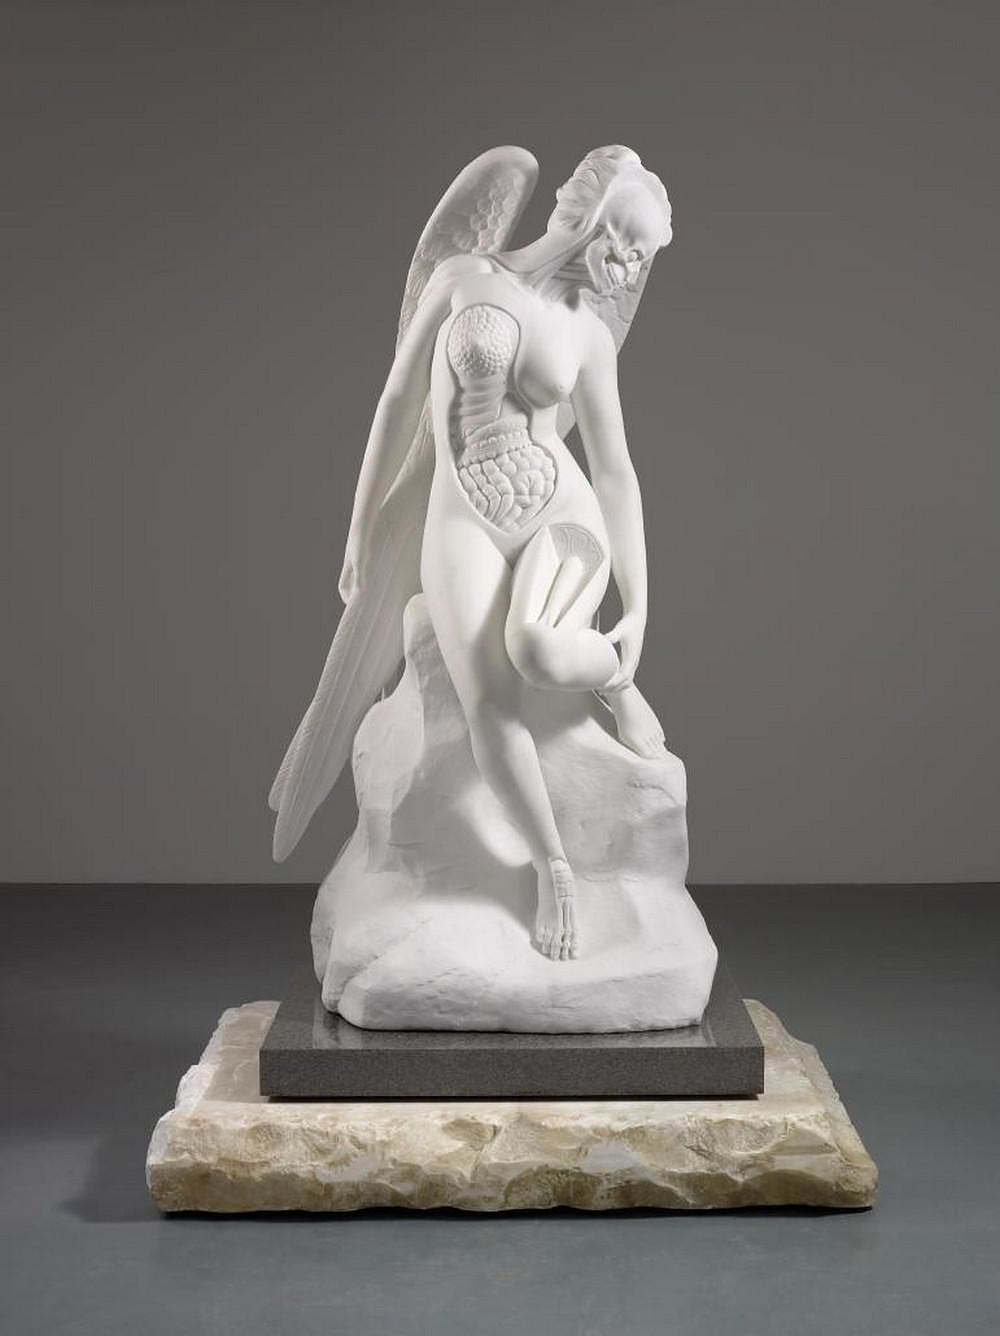 The Anatomy of an Angel by Damien Hirst.